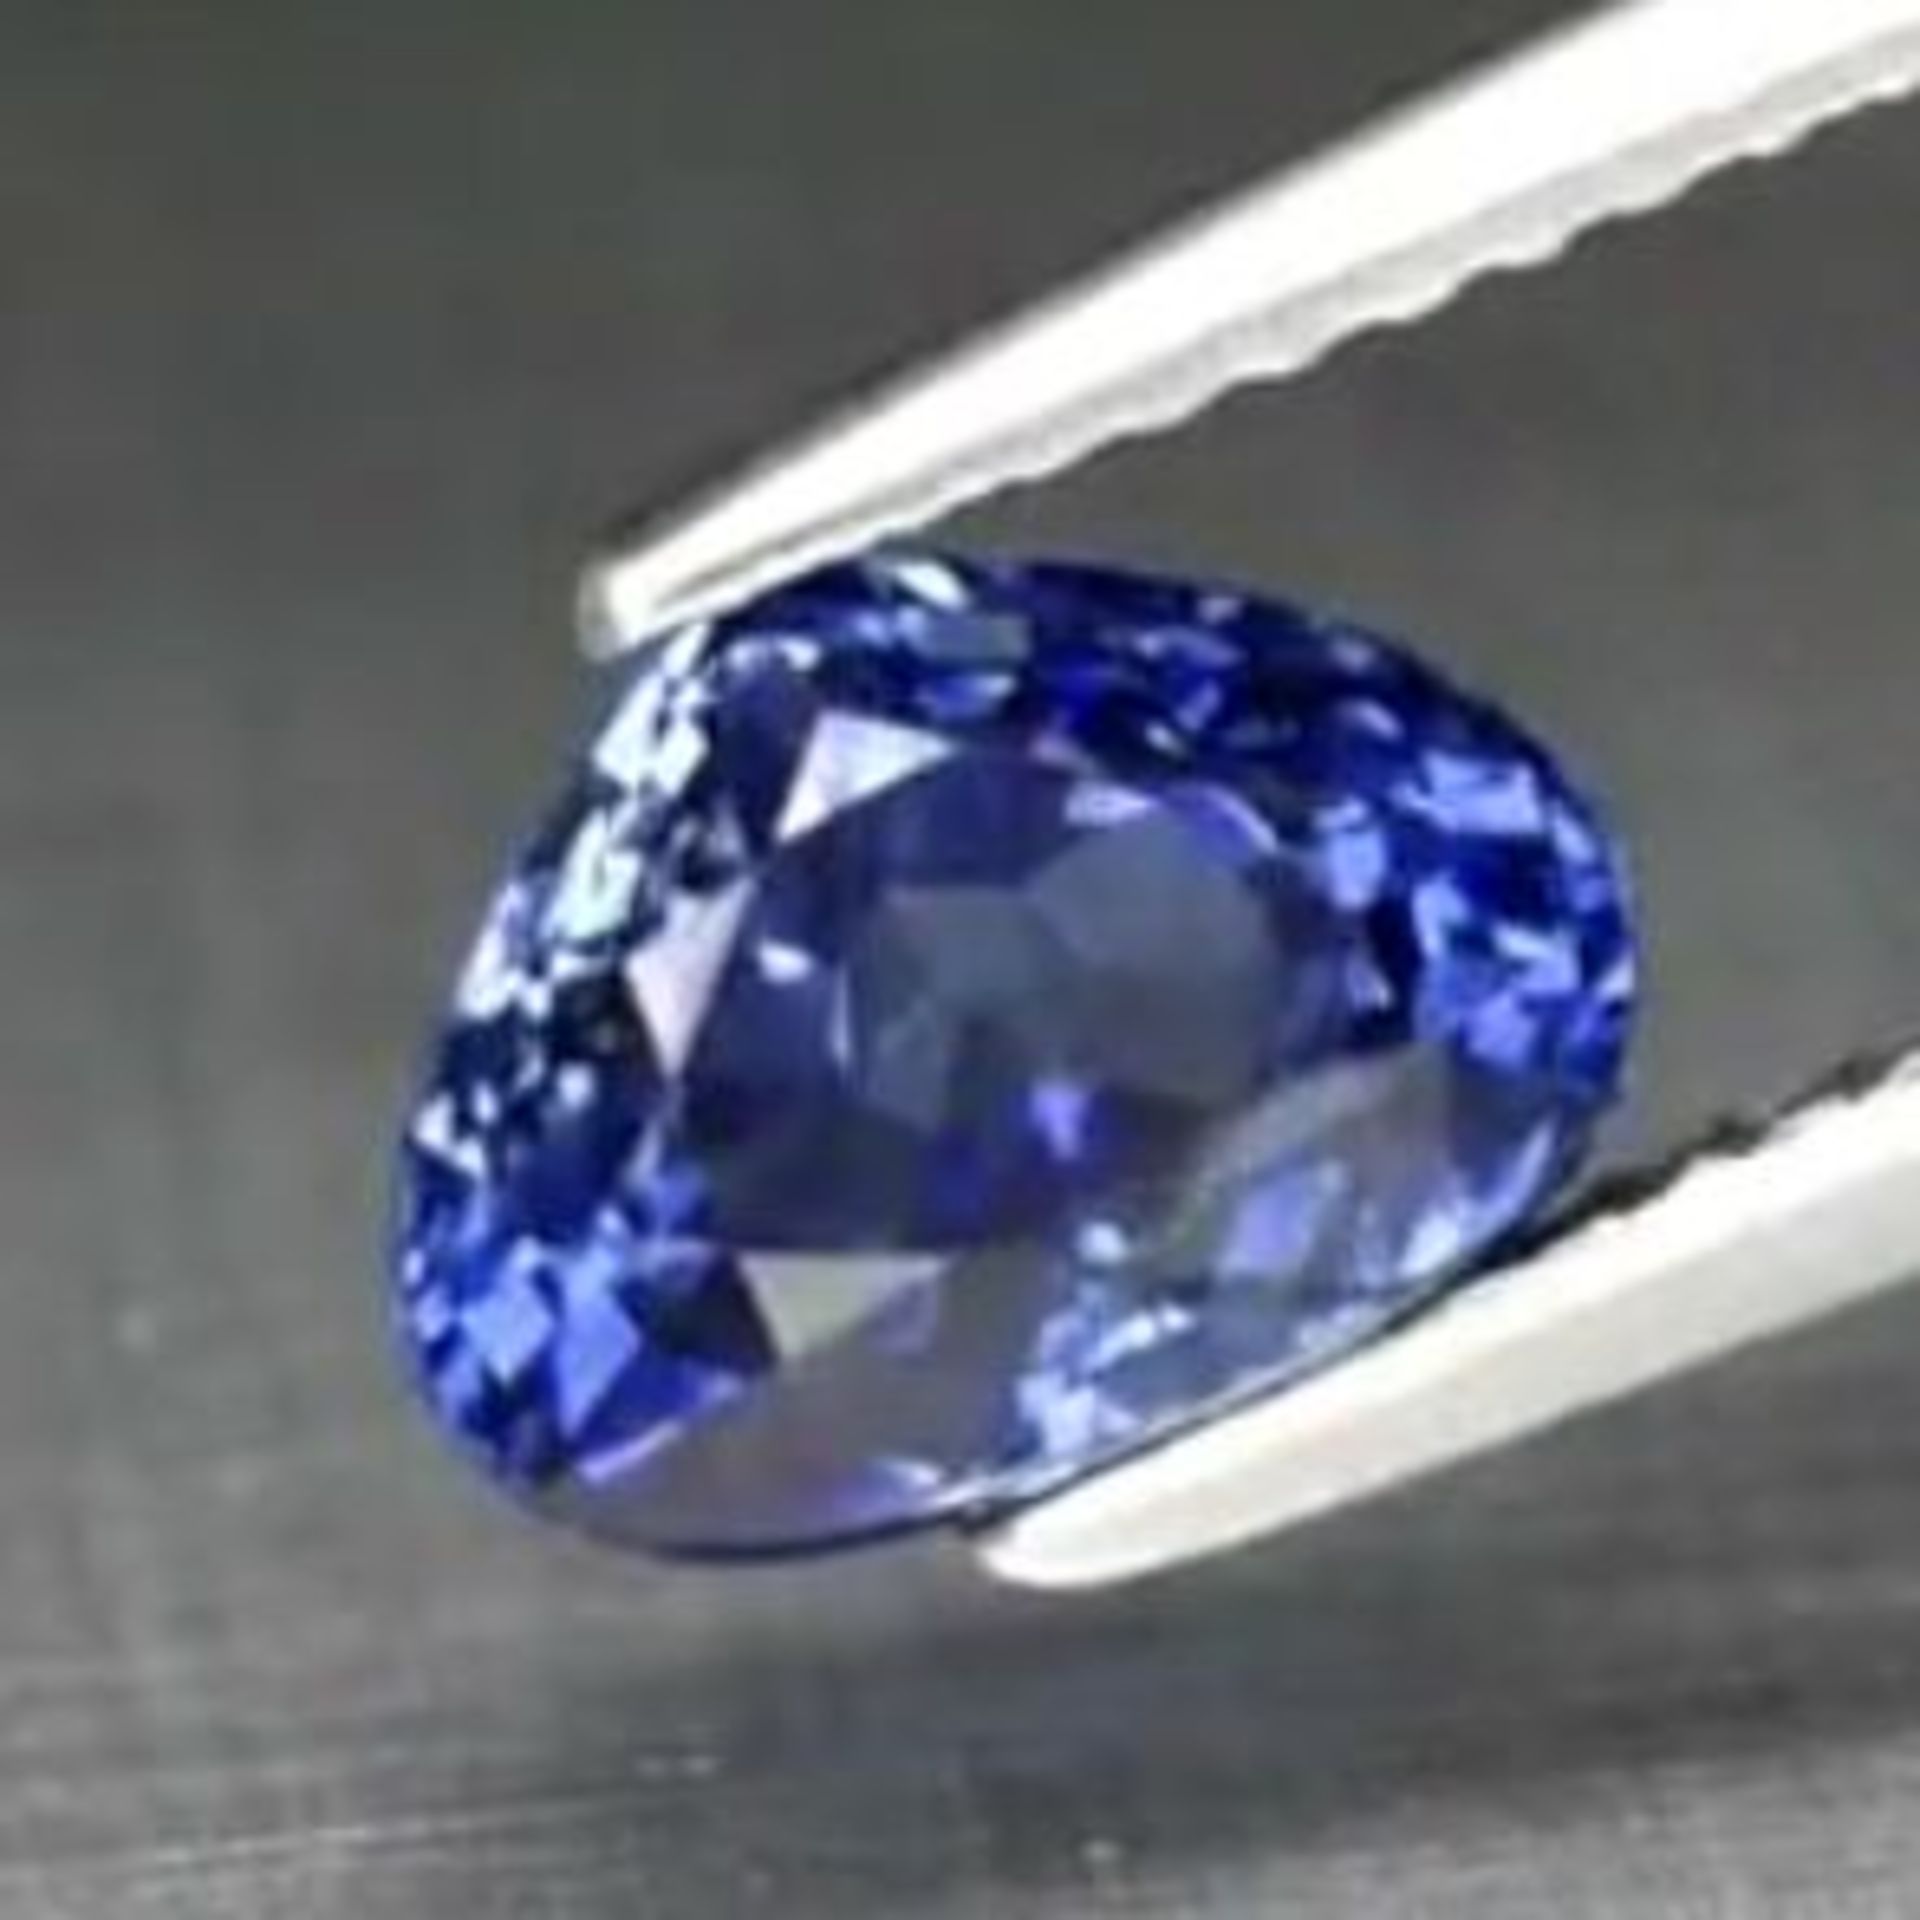 GIA Certified 2.08 ct. Blue Sapphire - Image 6 of 10